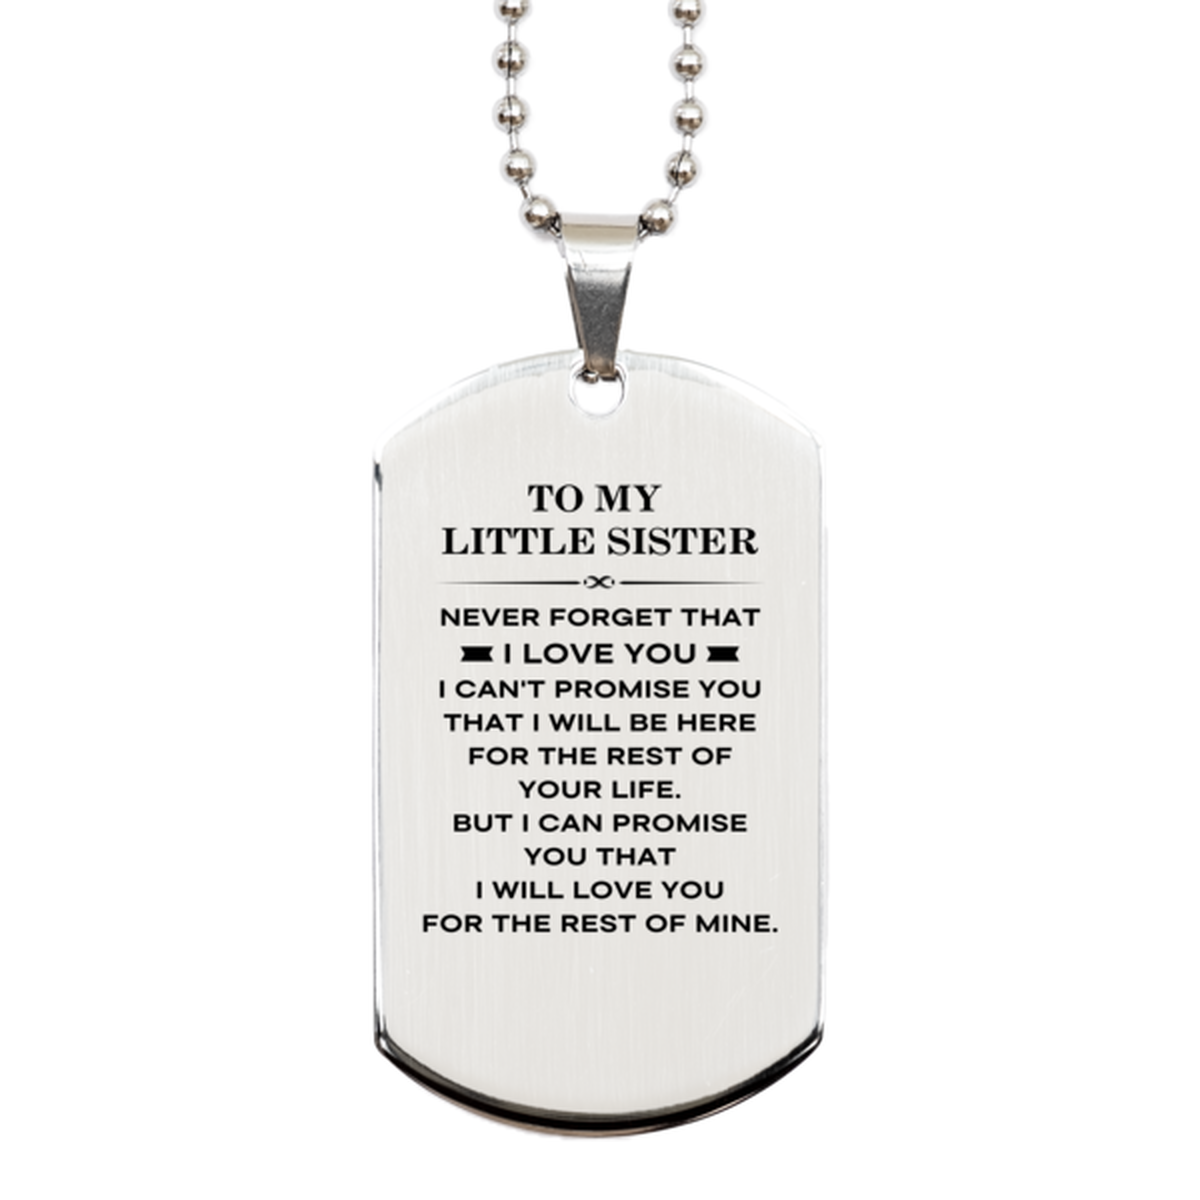 To My Little Sister Gifts, I will love you for the rest of mine, Love Little Sister Dog Tag Necklace, Birthday Christmas Unique Silver Dog Tag For Little Sister